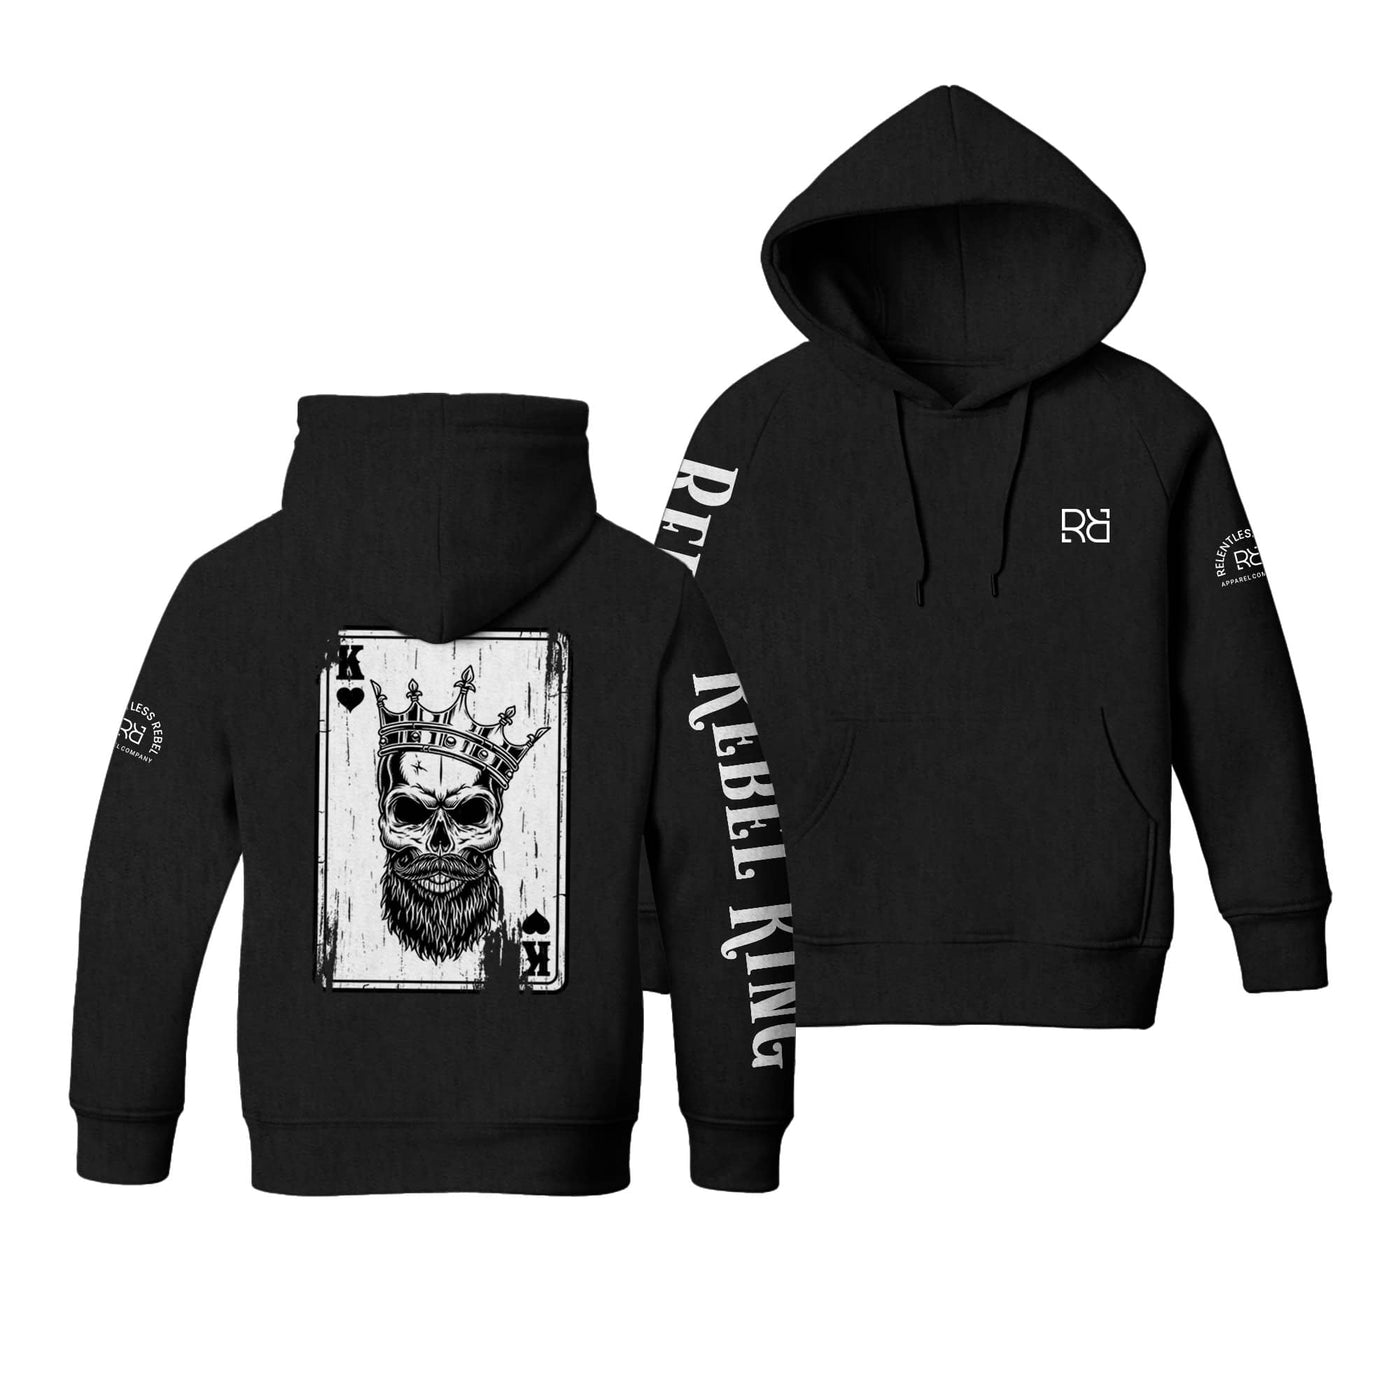 Solid Black Youth Rebel King - Ace Sleeve and Back Design Hoodie